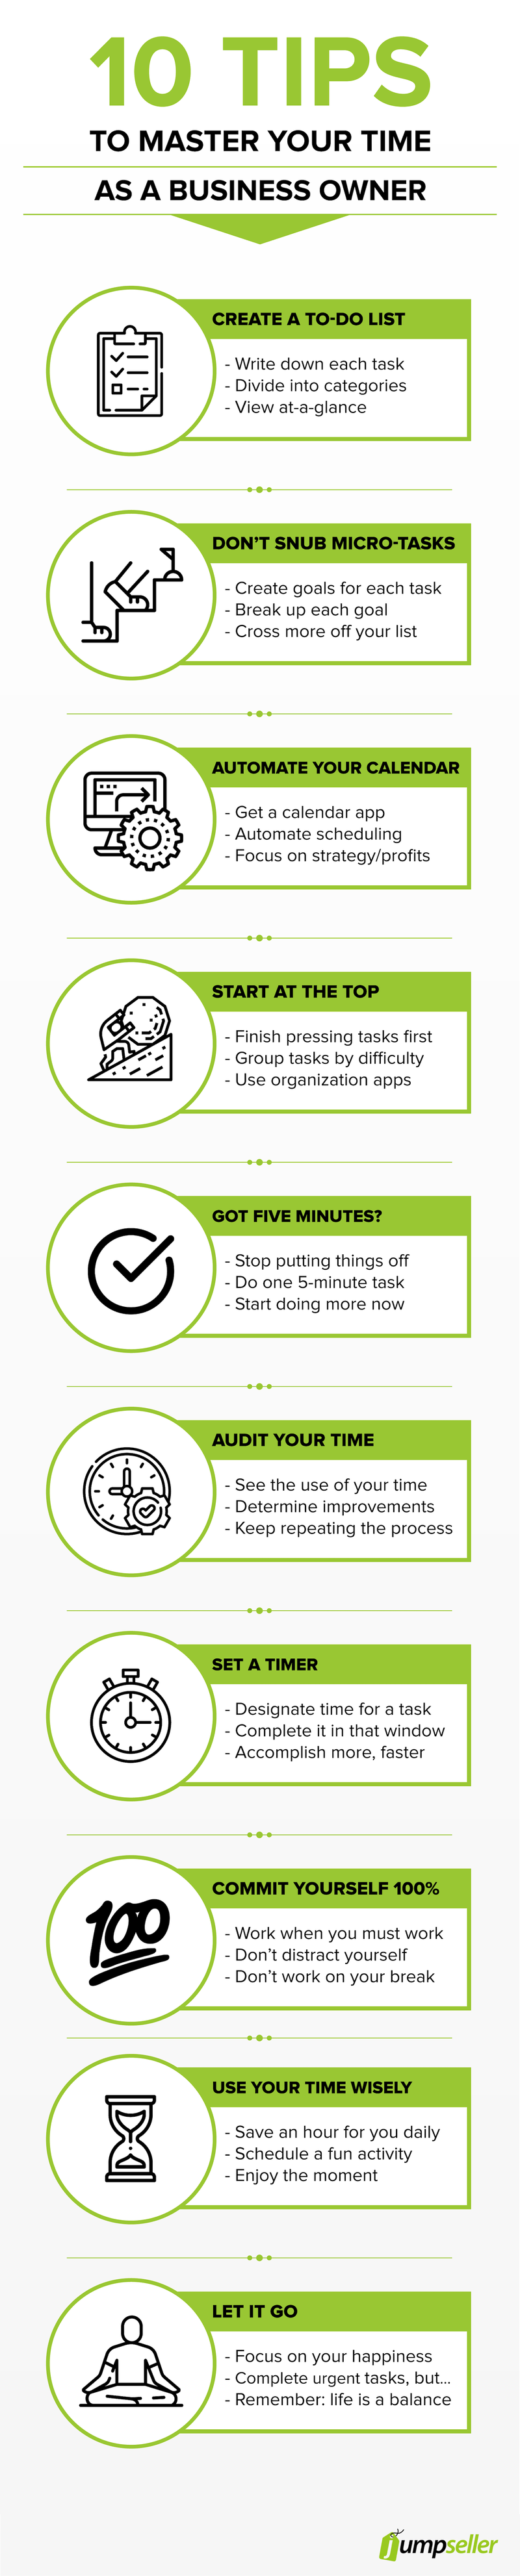 time management tips infographic